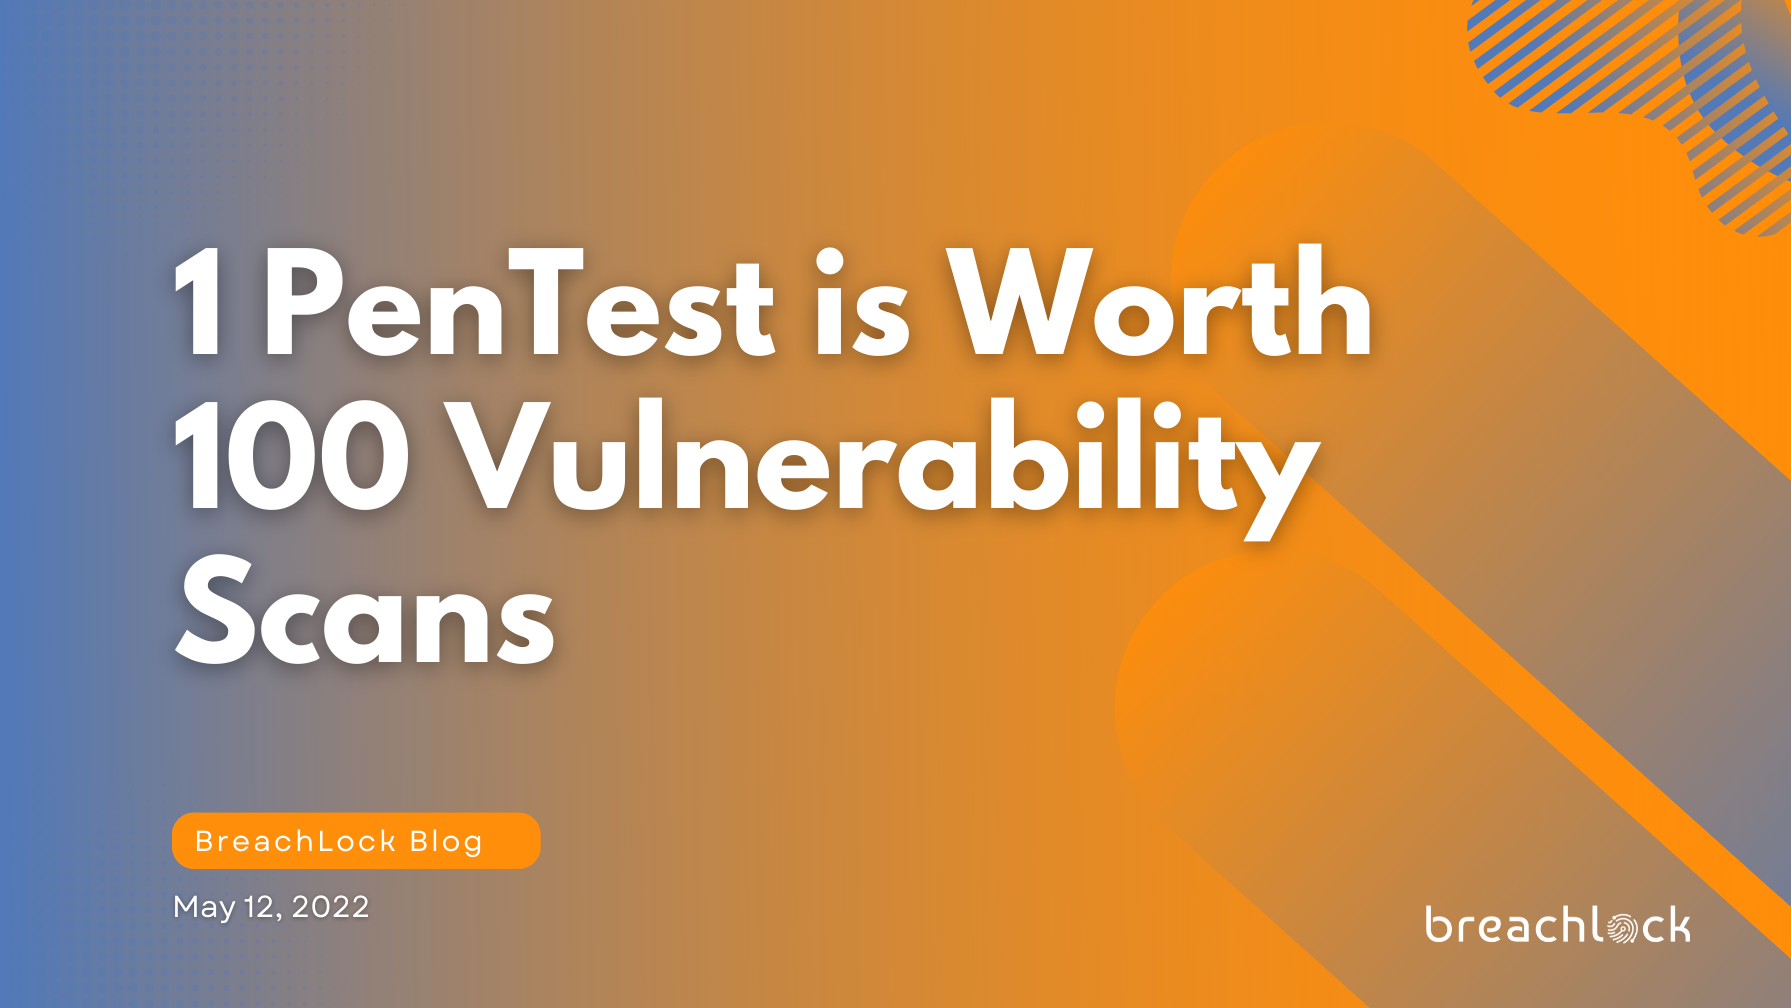 1 Penetration Test is worth 100 Vulnerbility Scan